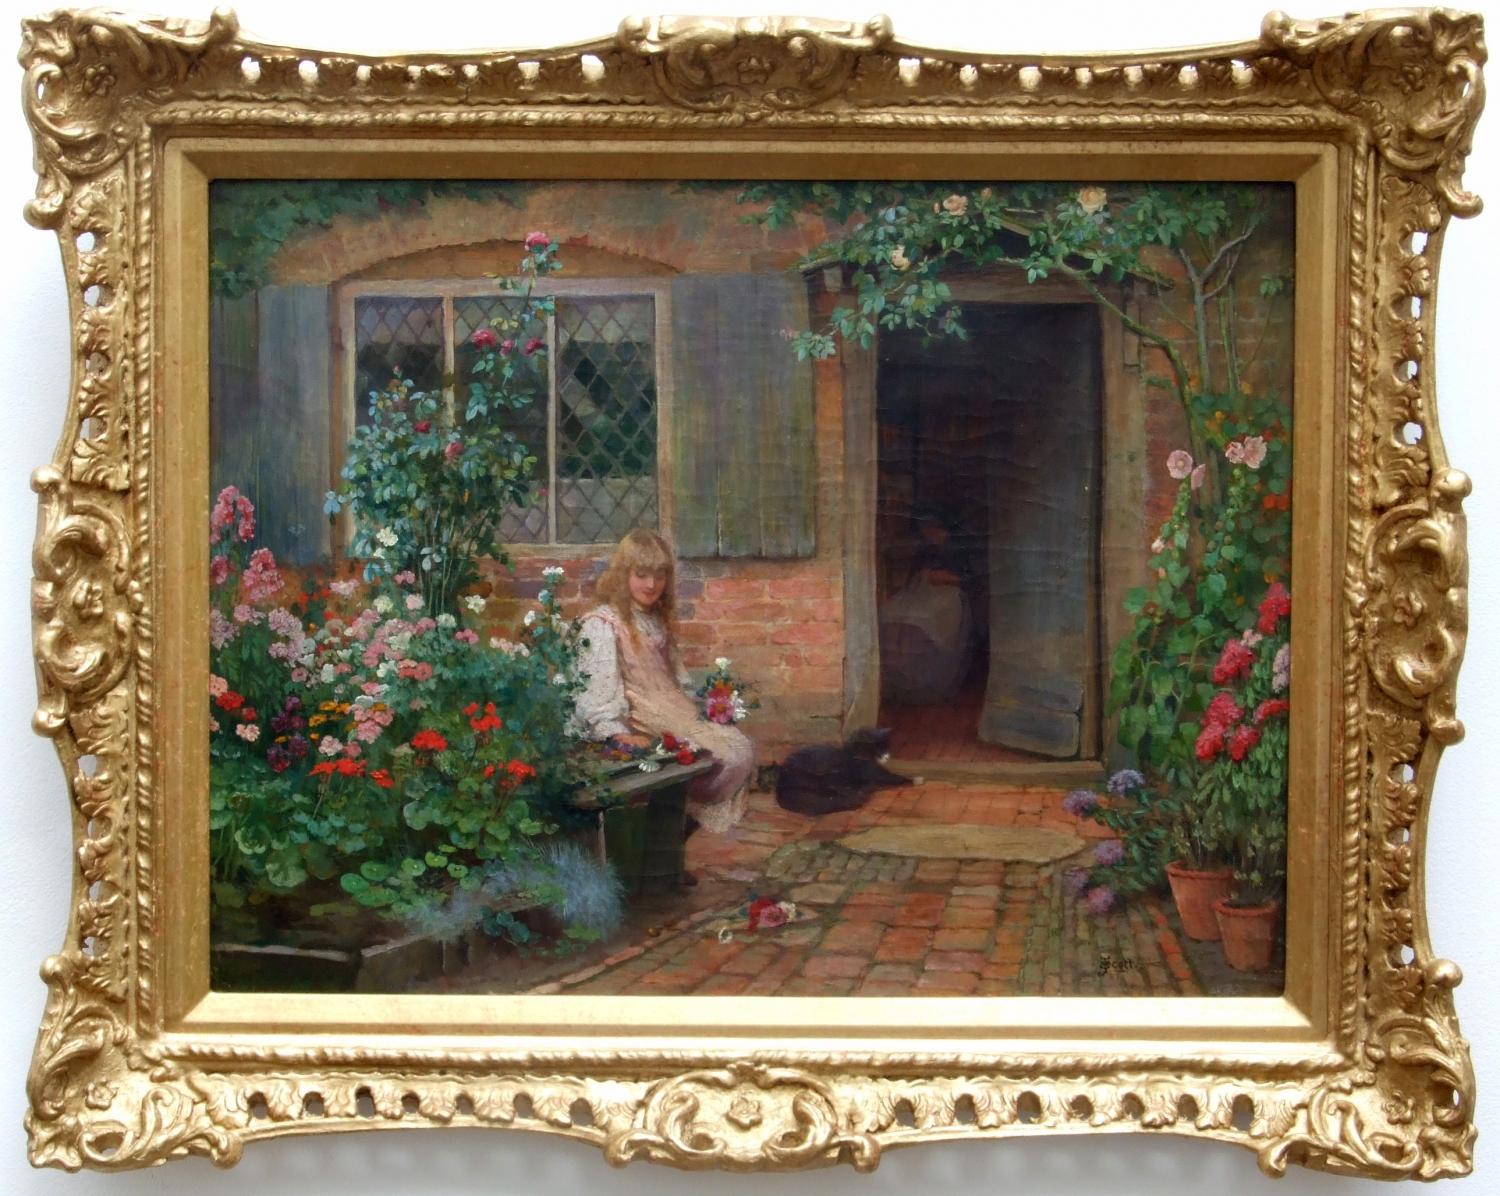 Oil study of girl in country cottage garden